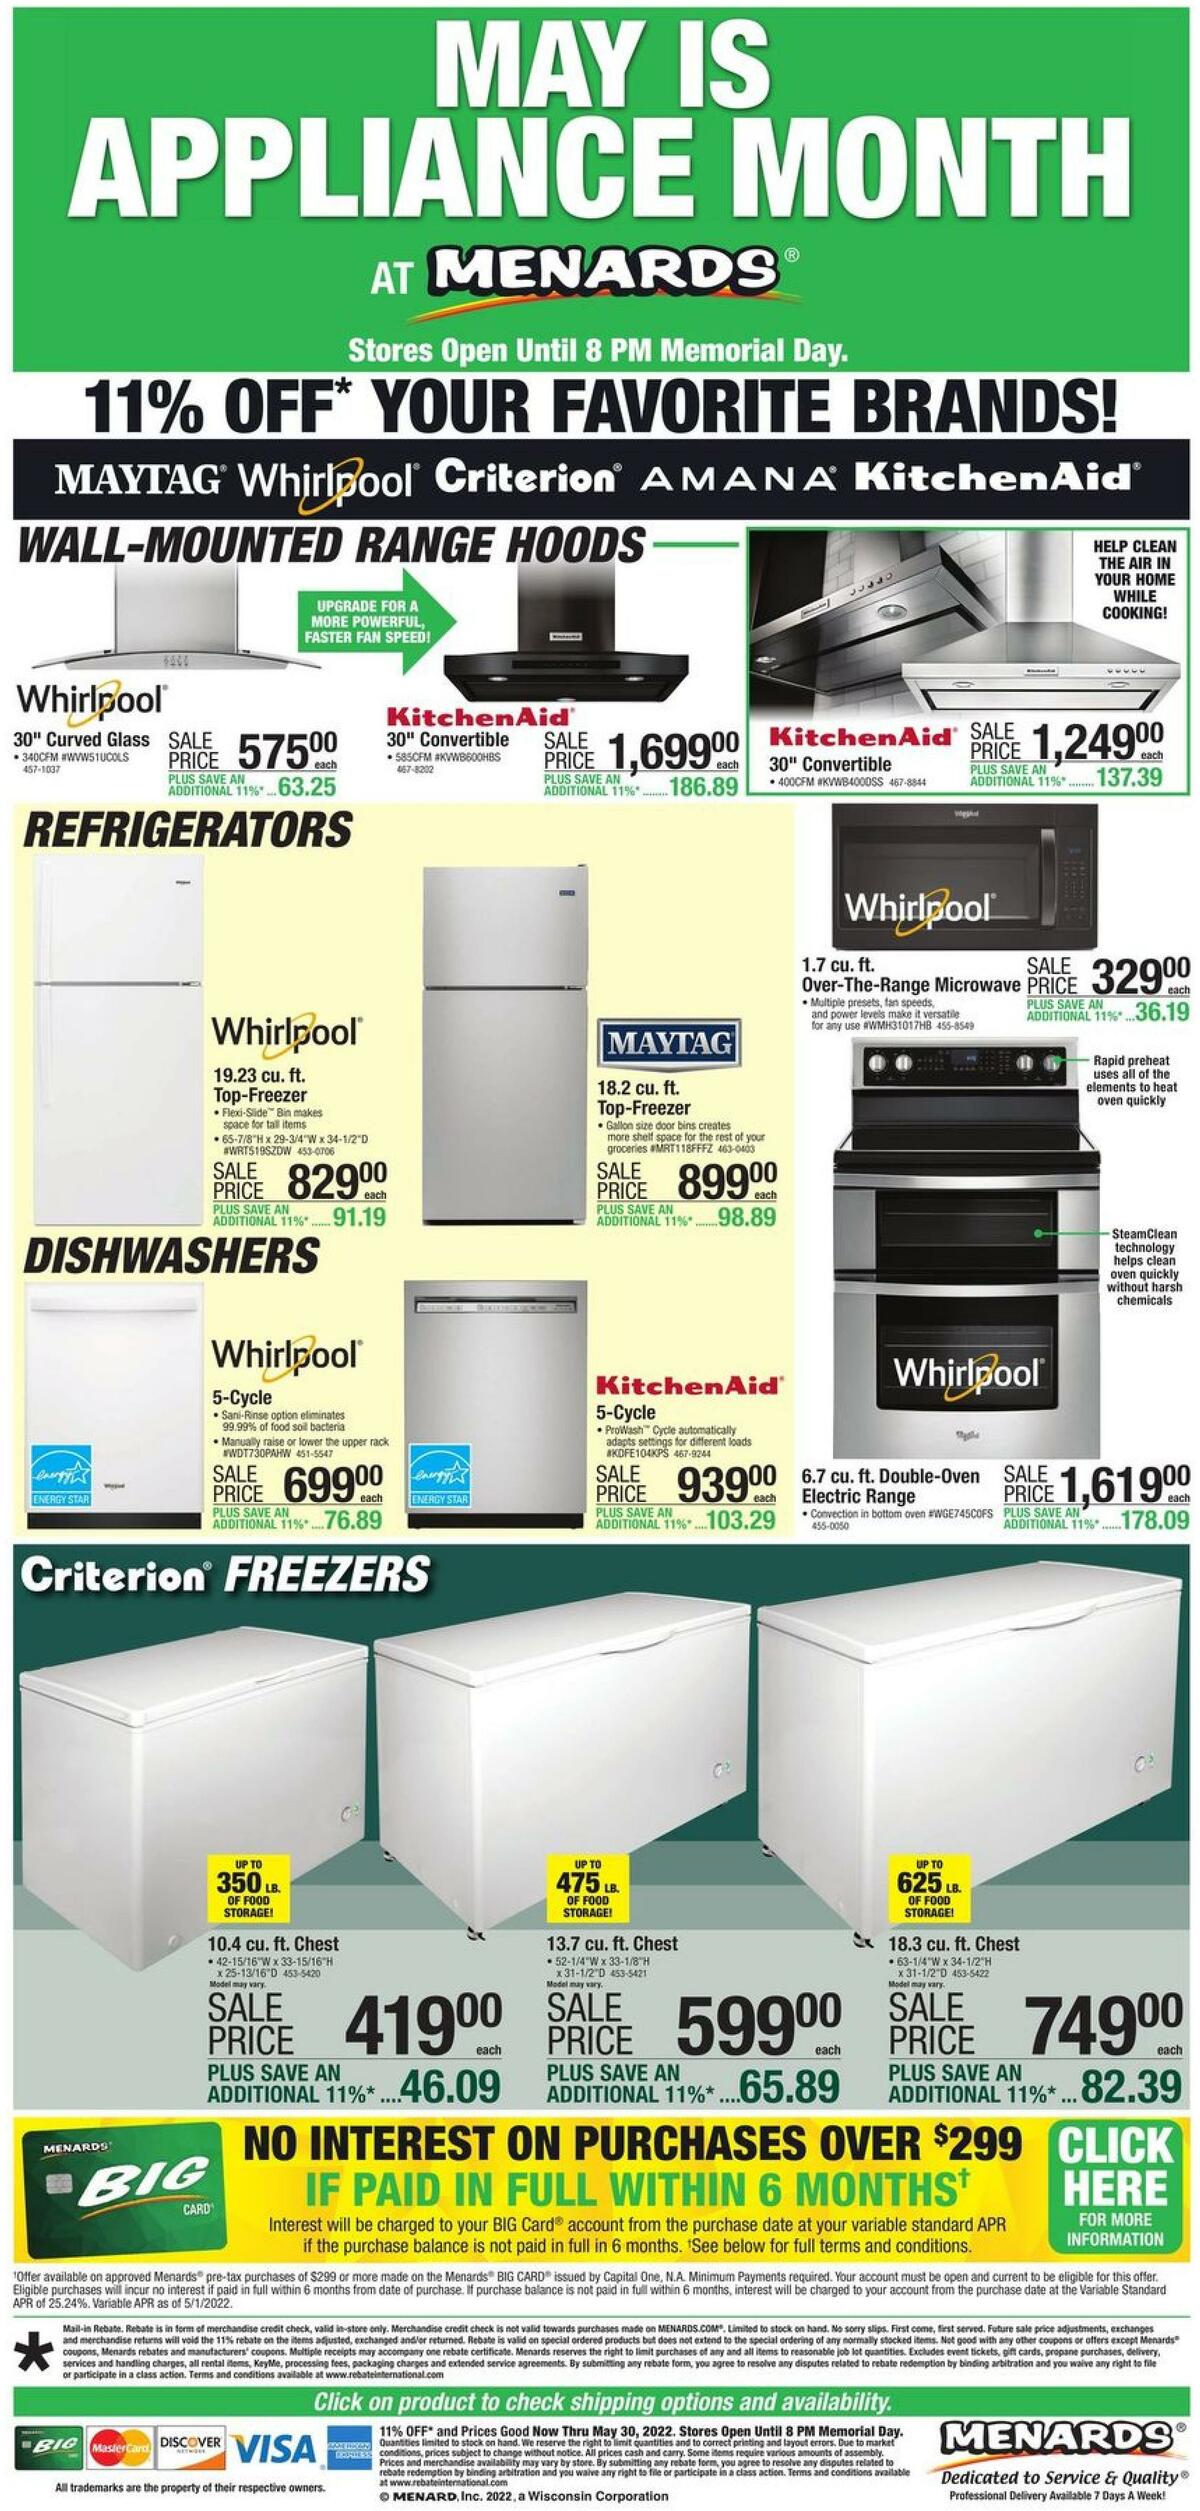 Menards Memorial Day Appliance Event Weekly Ad from May 19